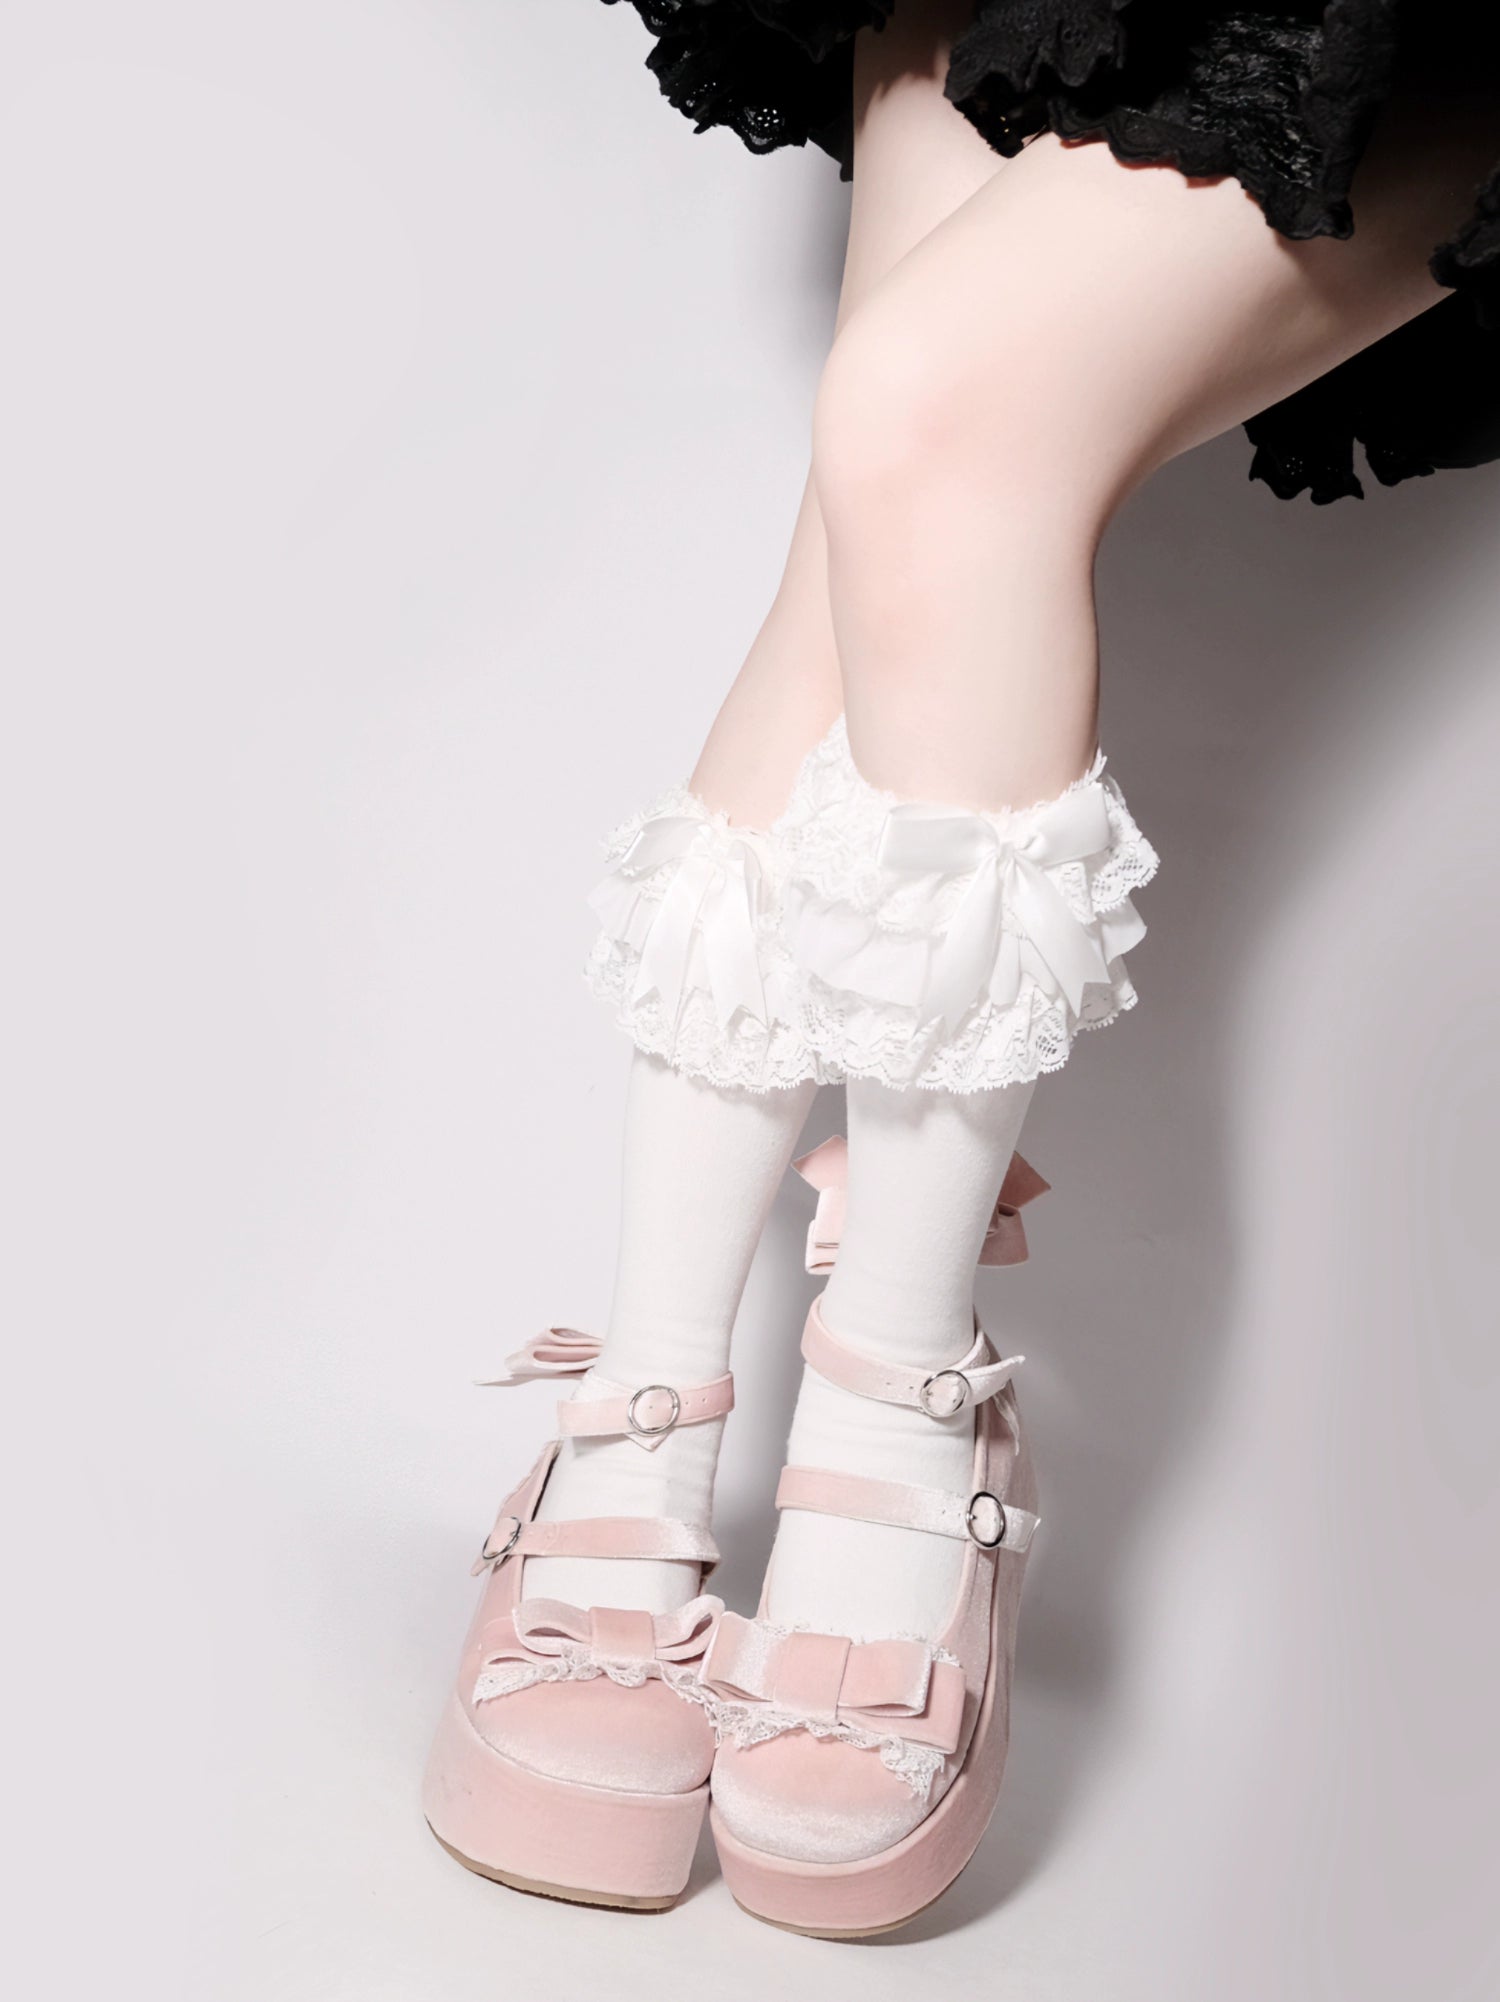 Lolita Shoes Round-Toe Platform Shoes With Velvet Bow 37132:552704